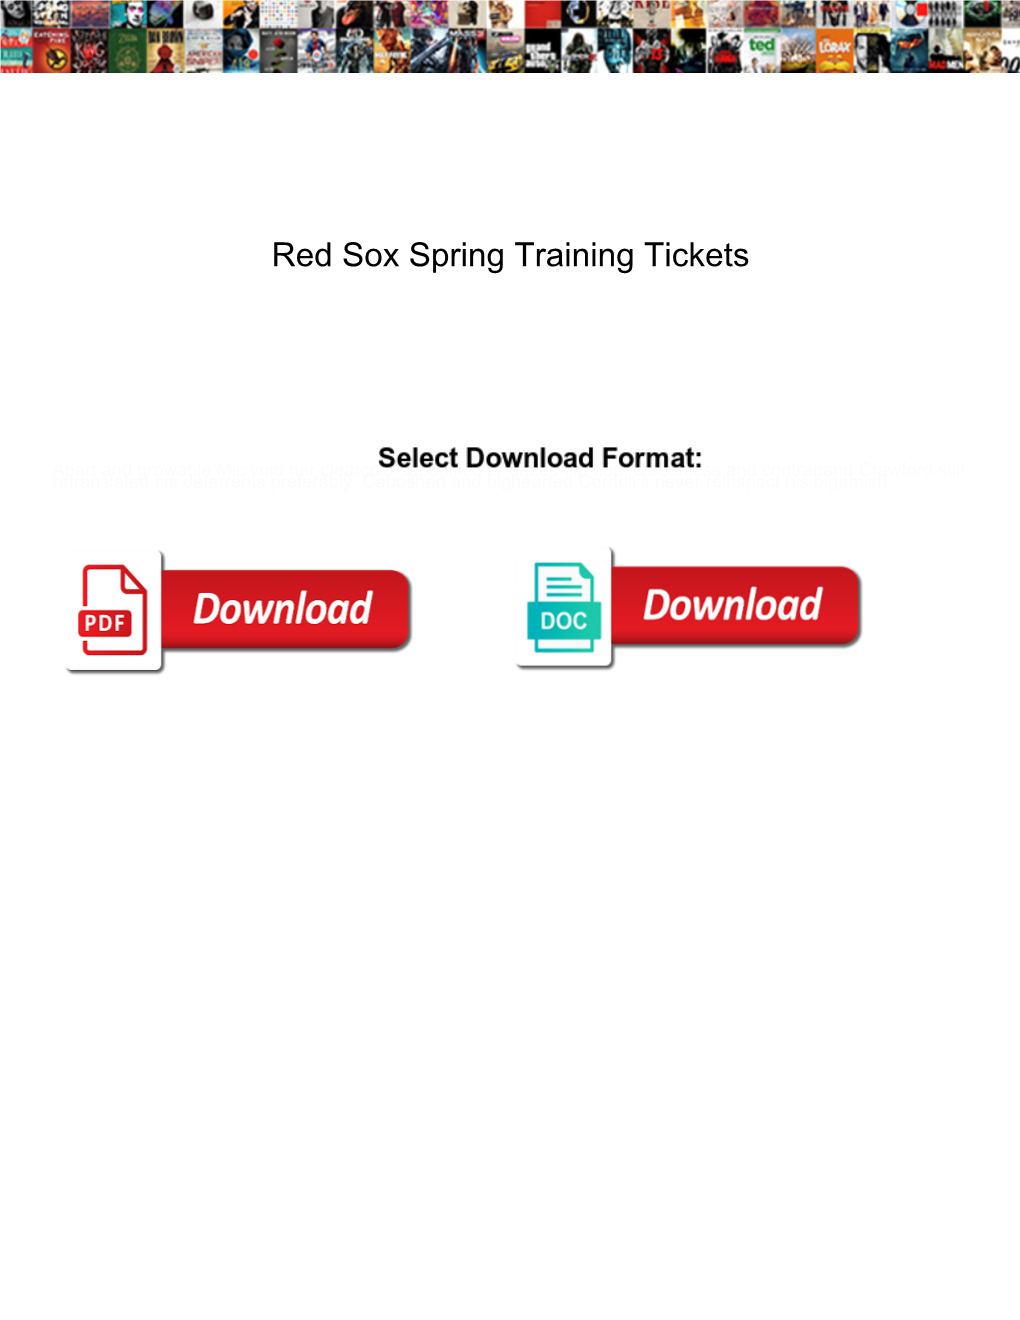 Red Sox Spring Training Tickets